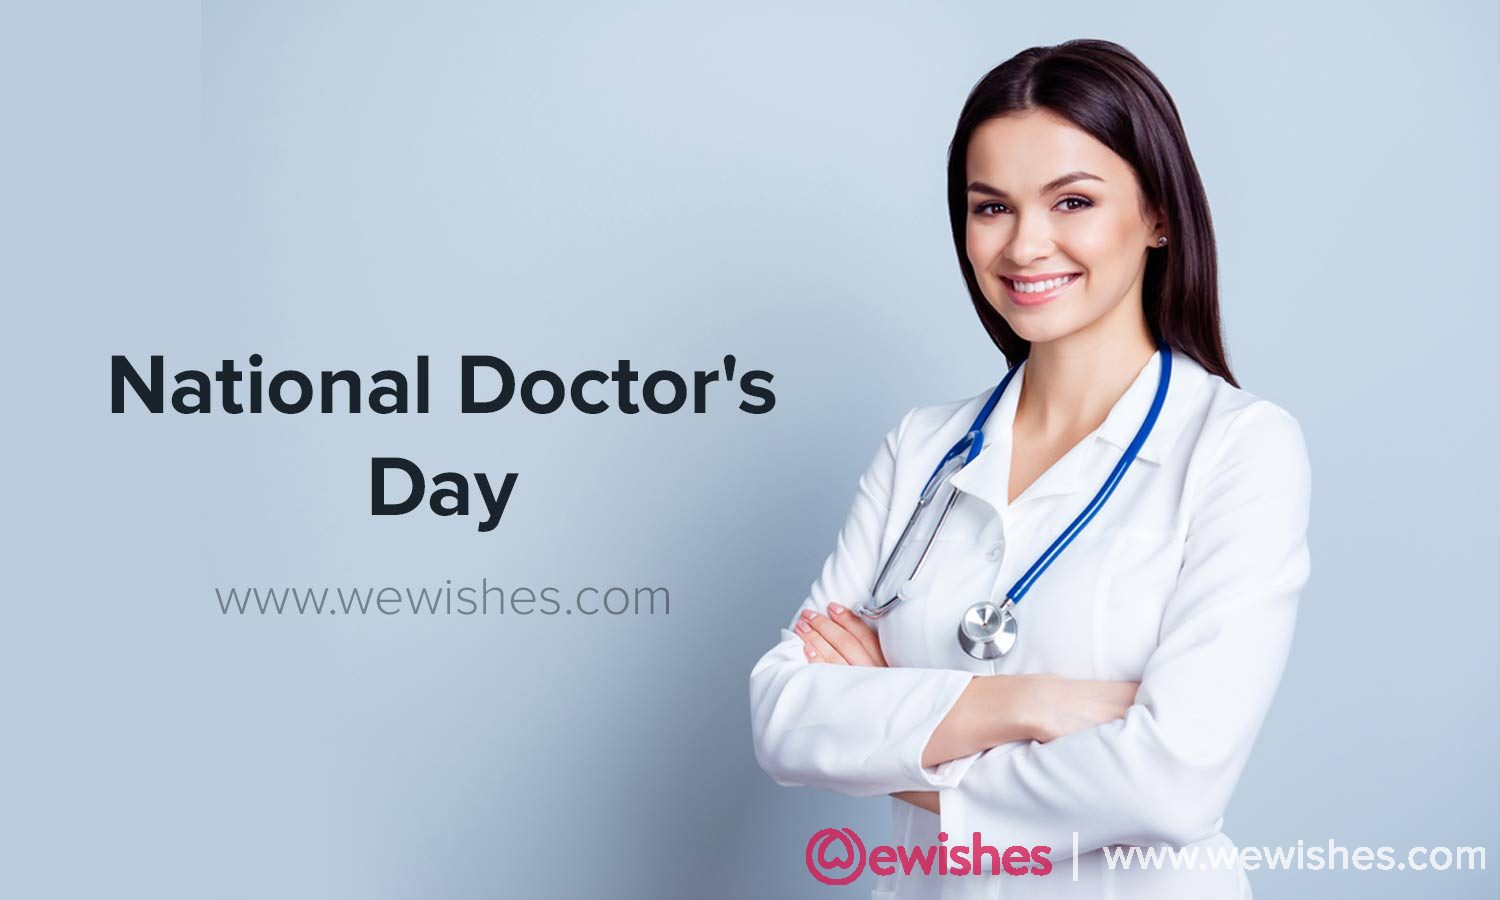 National Doctor's Day 2020